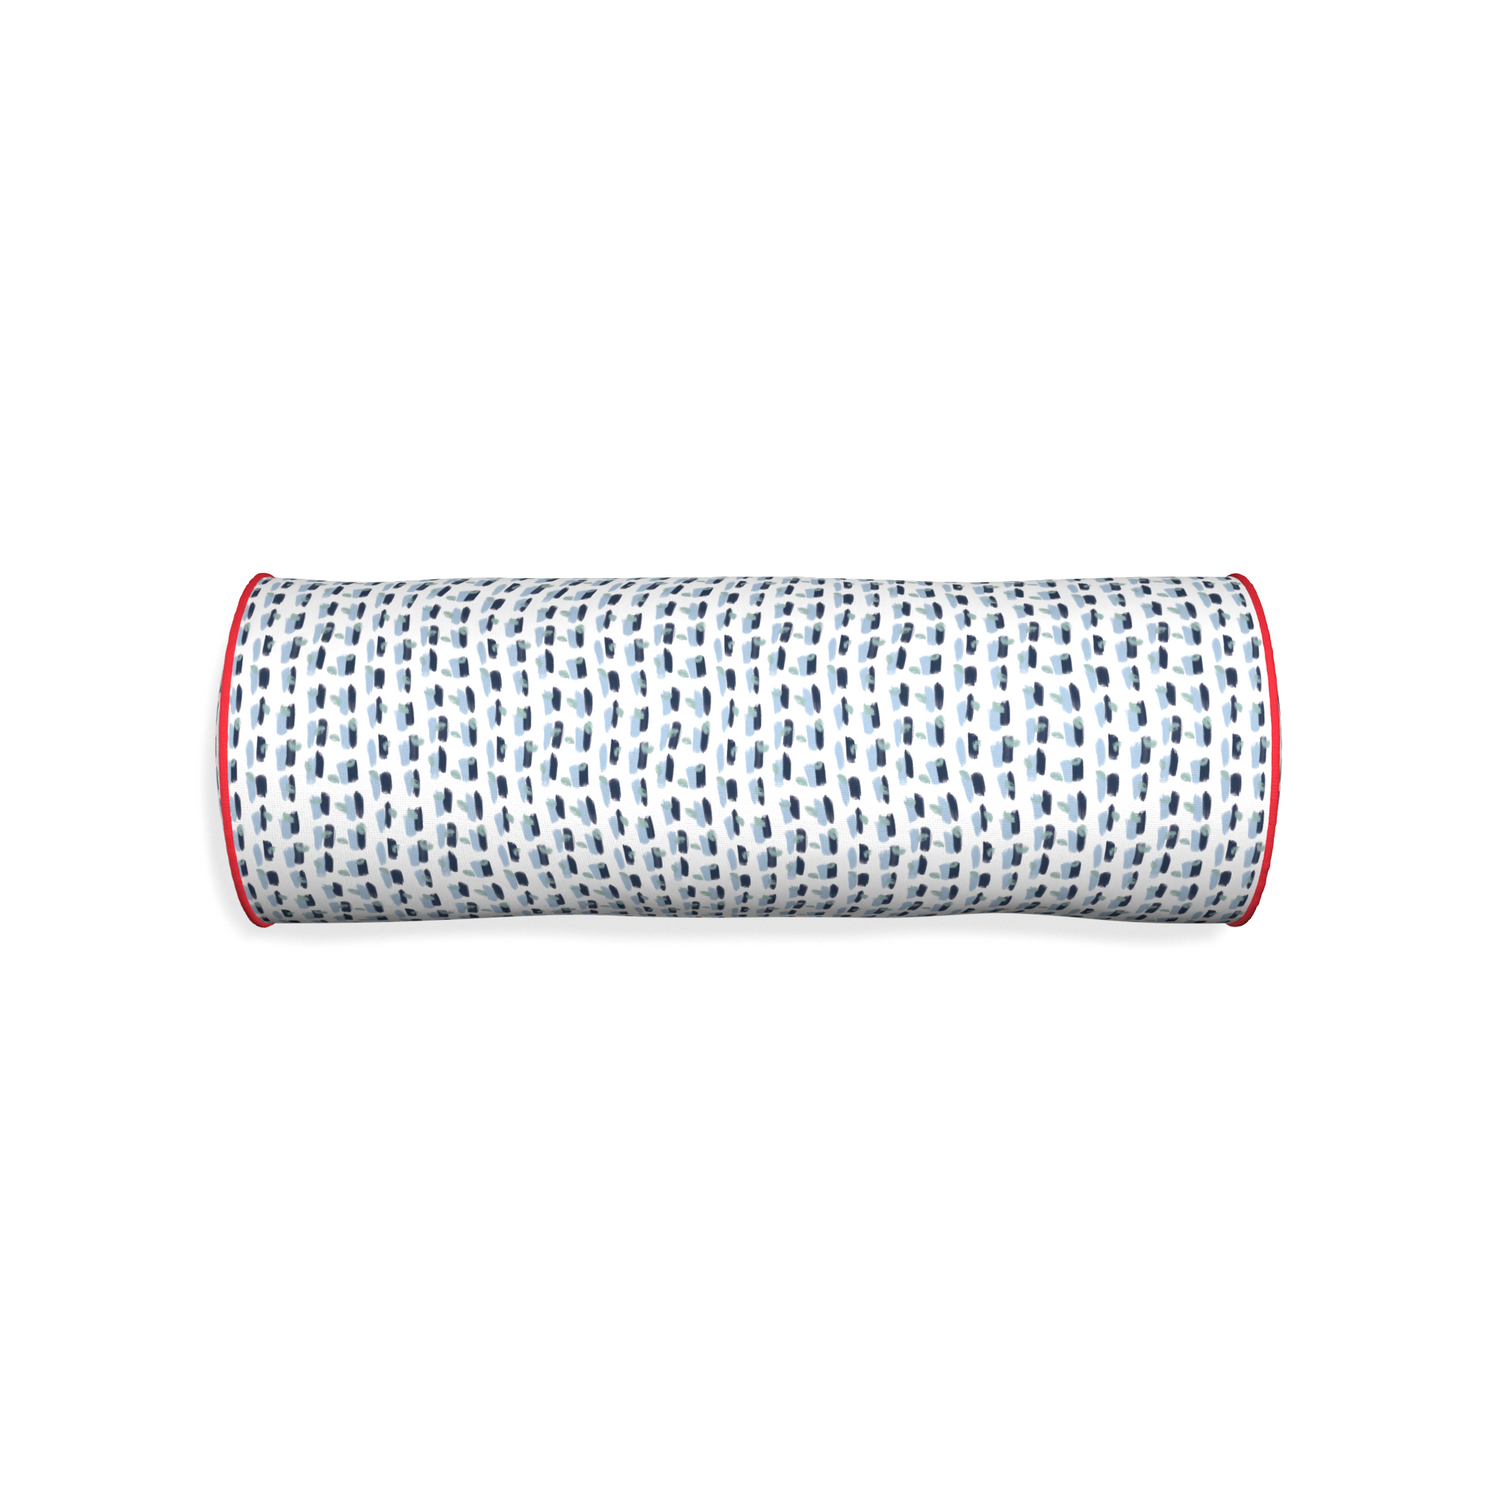 Bolster poppy blue custom pillow with cherry piping on white background